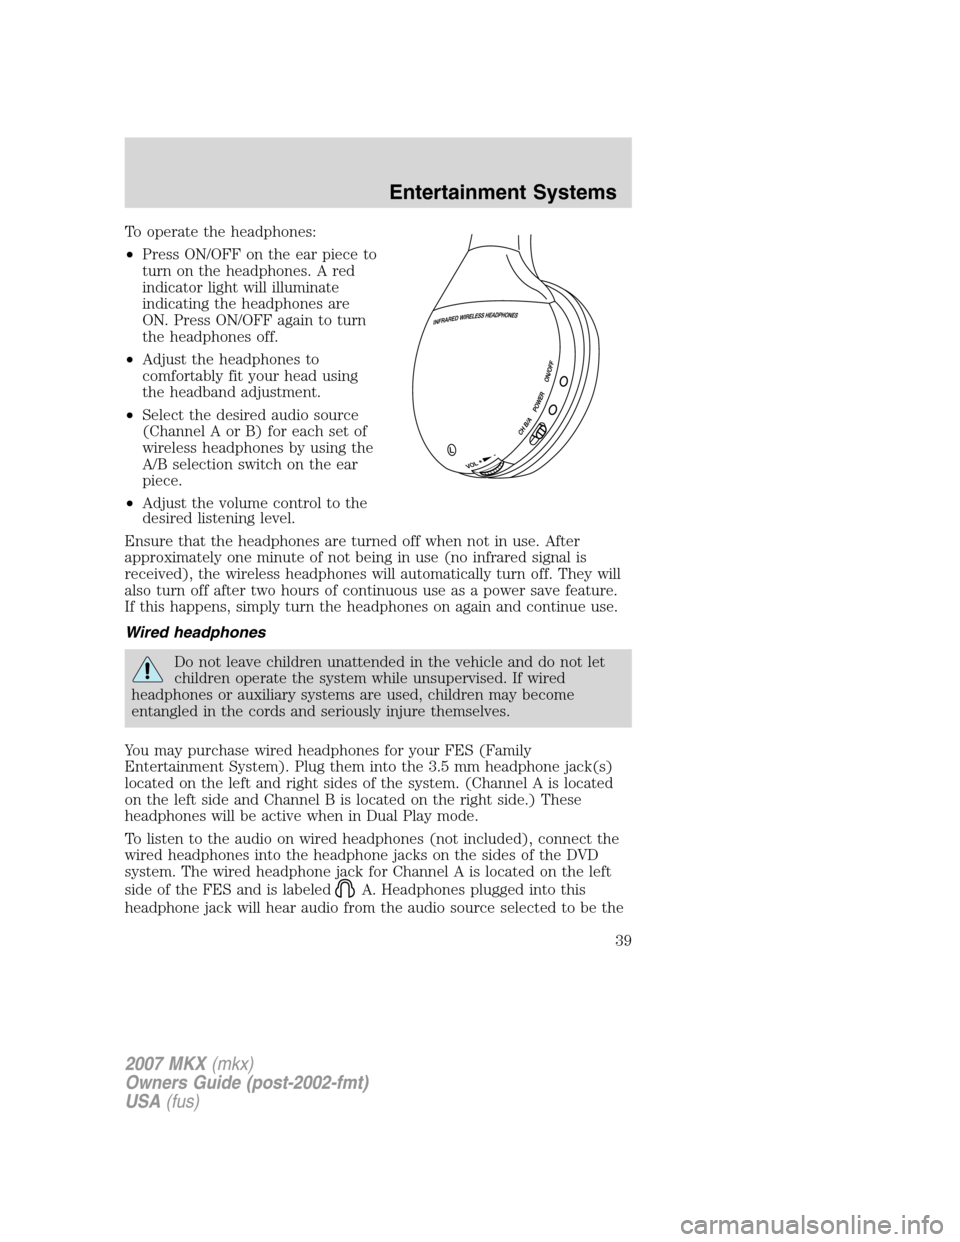 LINCOLN MKX 2007  Owners Manual To operate the headphones:
•Press ON/OFF on the ear piece to
turn on the headphones. A red
indicator light will illuminate
indicating the headphones are
ON. Press ON/OFF again to turn
the headphones